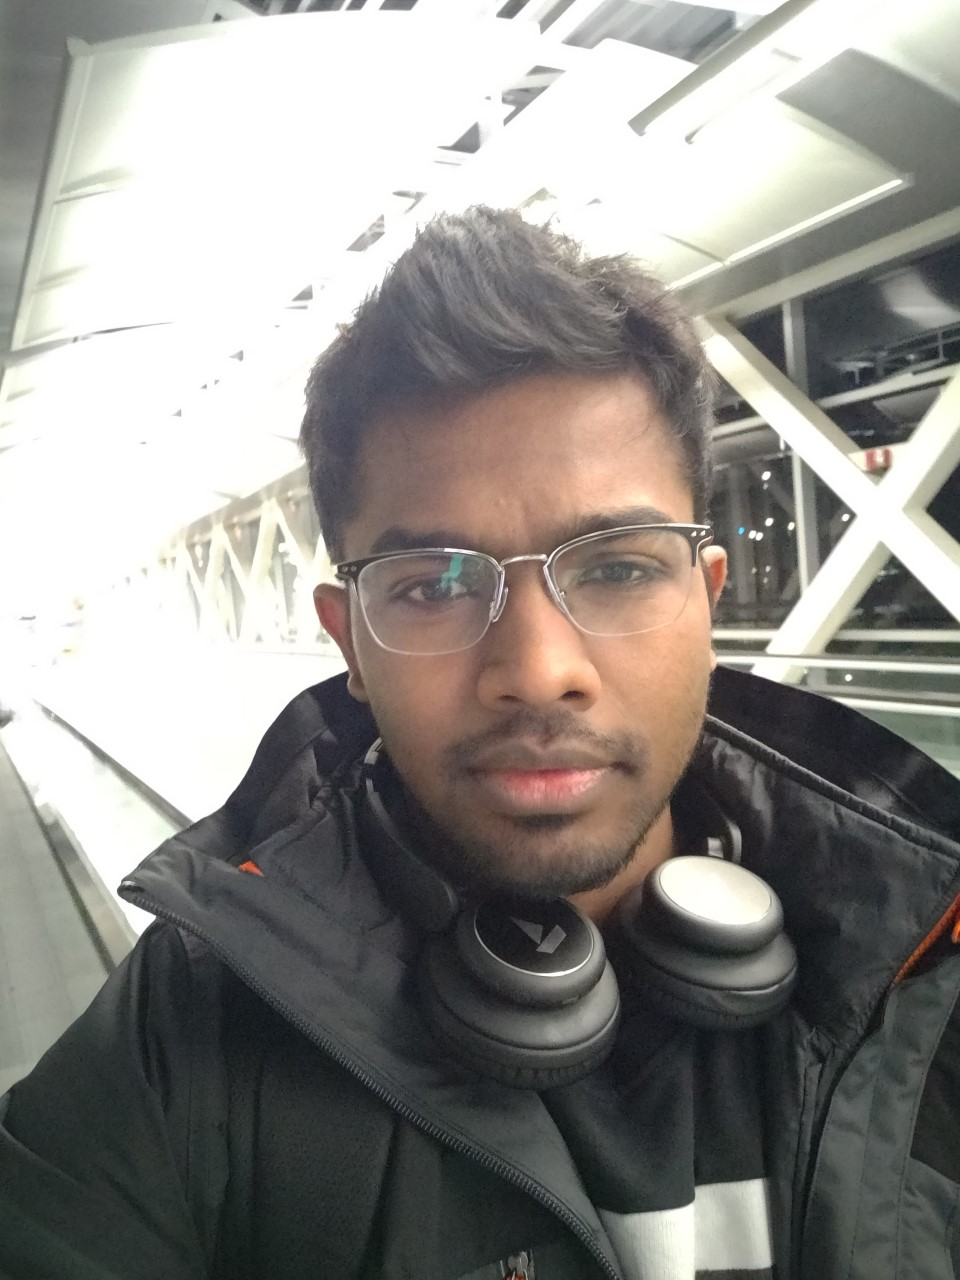 A selfie of Iniyan wearing glasses and headphones around his neck.